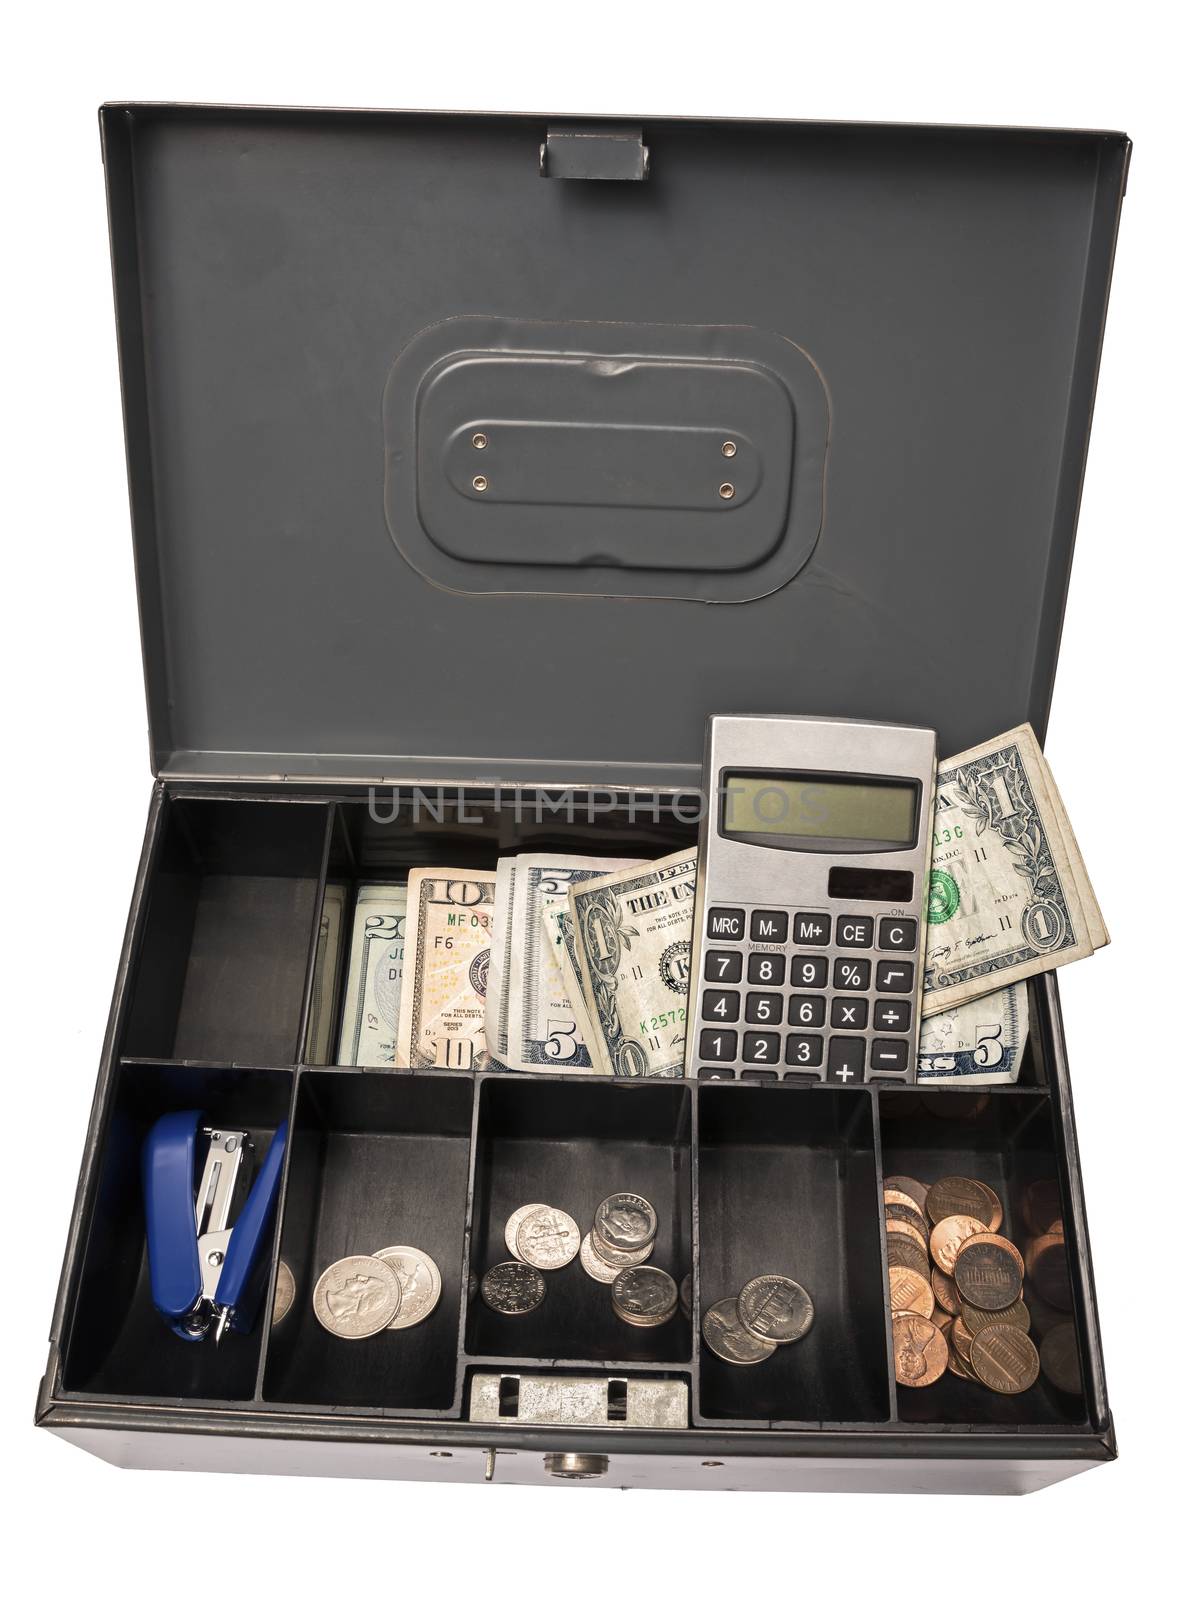 Old cash box holding cash, coins, calculator, and a stapler.